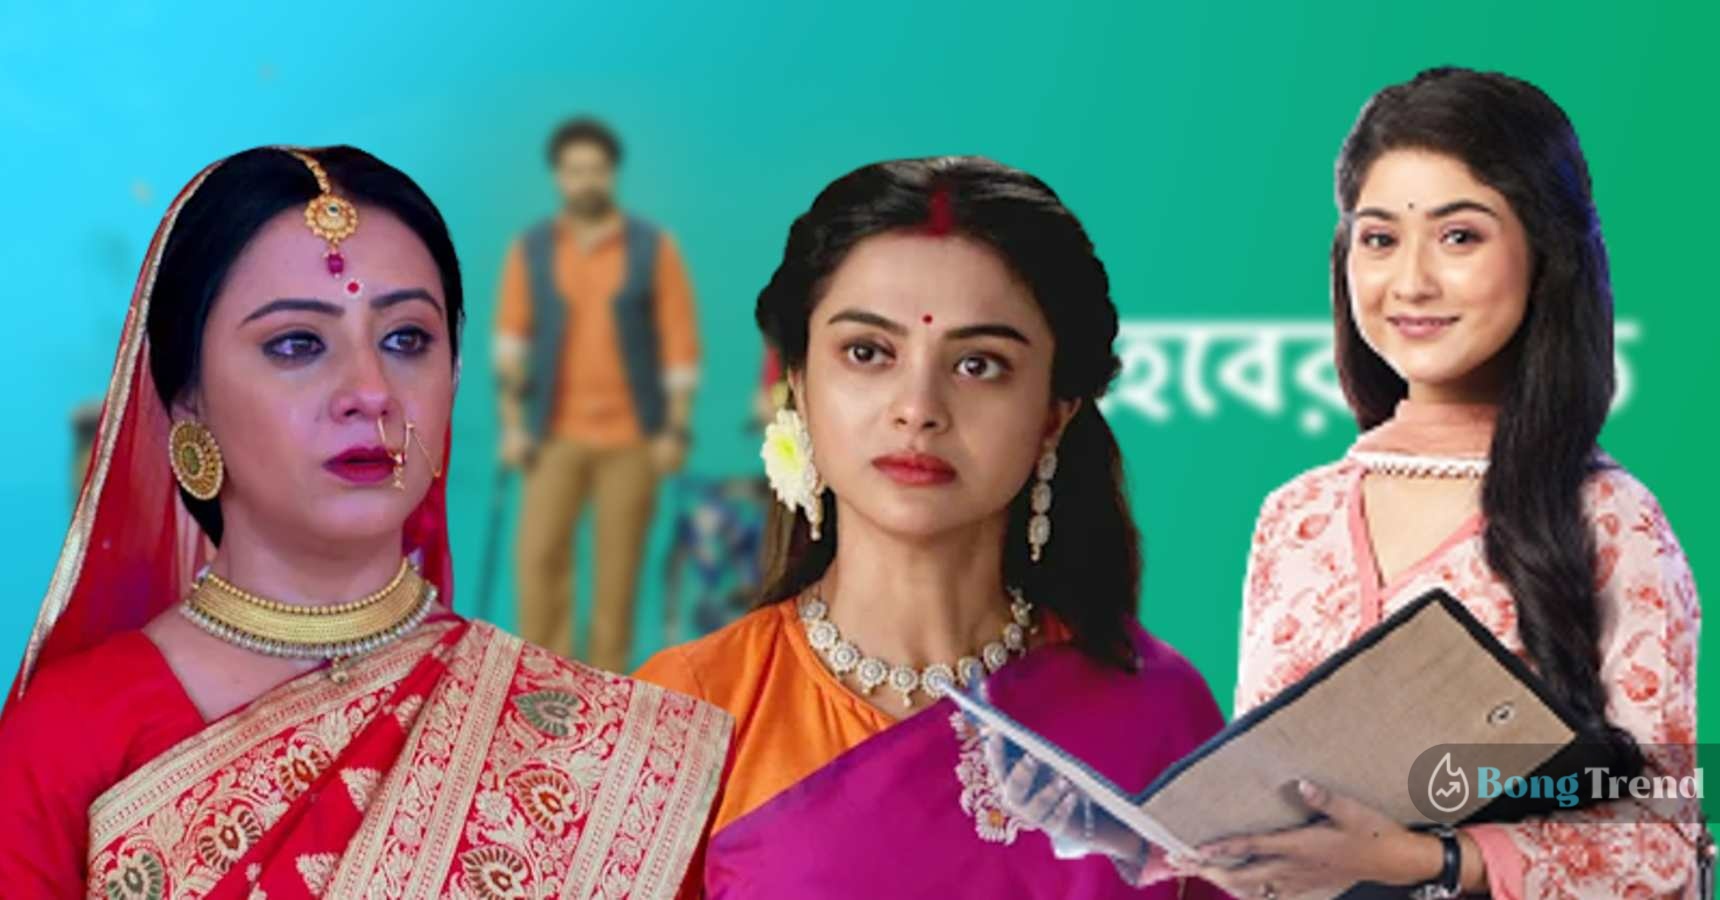 Star Jalsha Serial New updated timeslot and repeat telecast timing